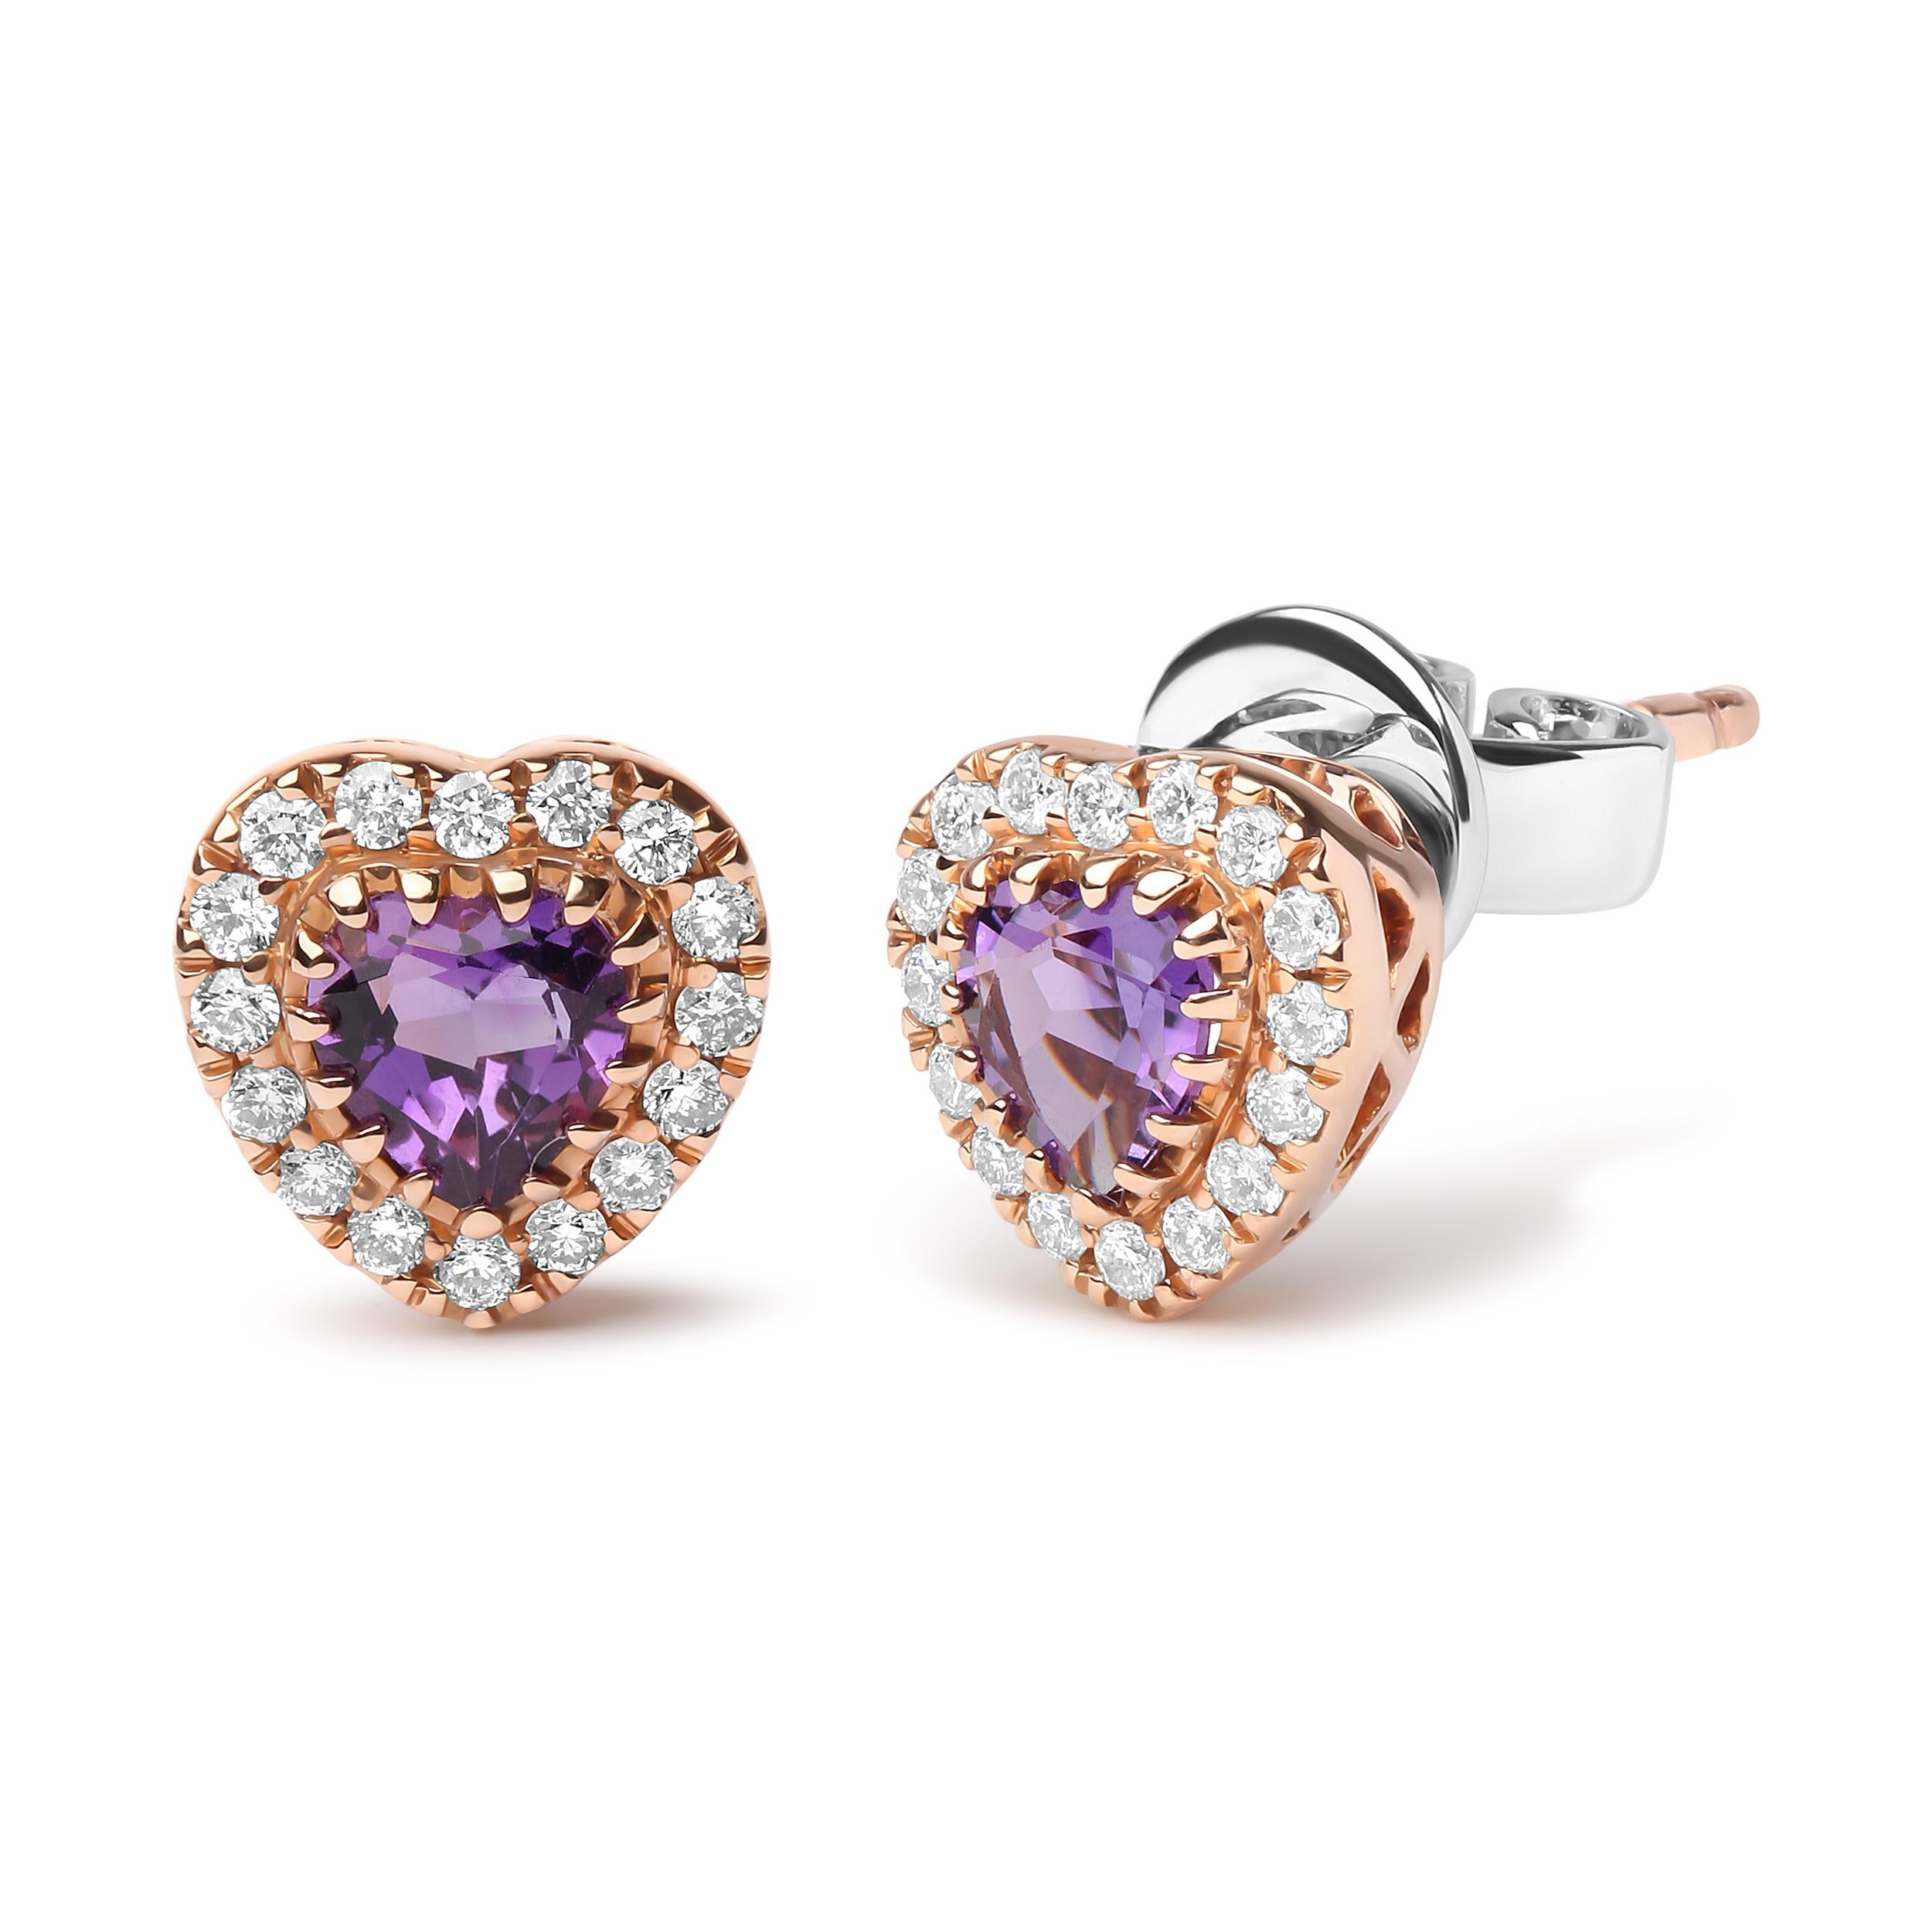 These 18k white and rose gold studs are the perfect gift for the romantic at heart. At the very center of this pair rests a natural 4mm heart-cut purple amethyst gemstone secured within a prong setting. In a halo around this heart-shaped centerpiece